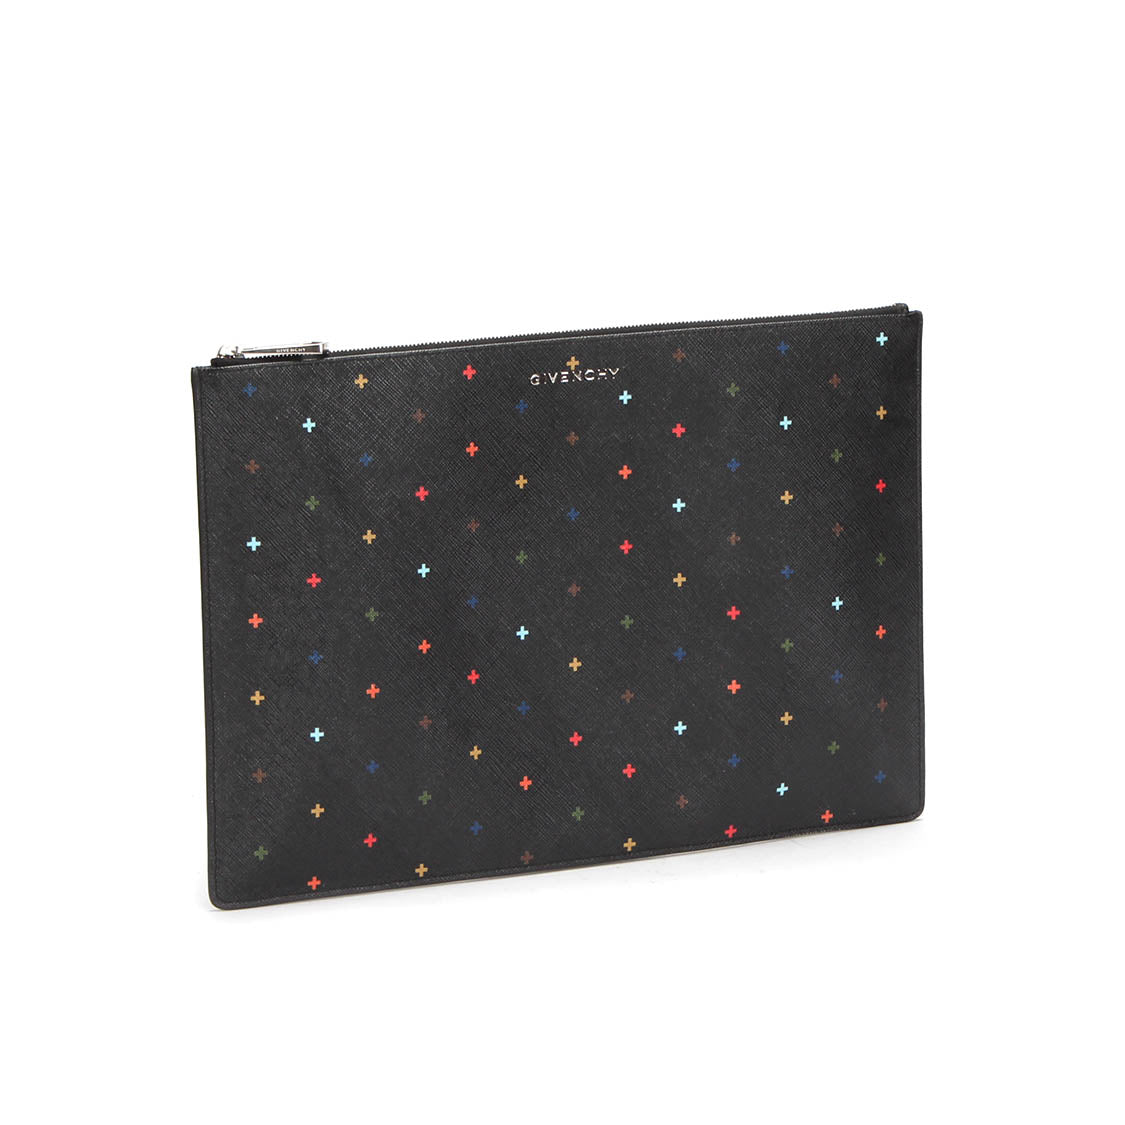 Printed Leather Clutch Bag